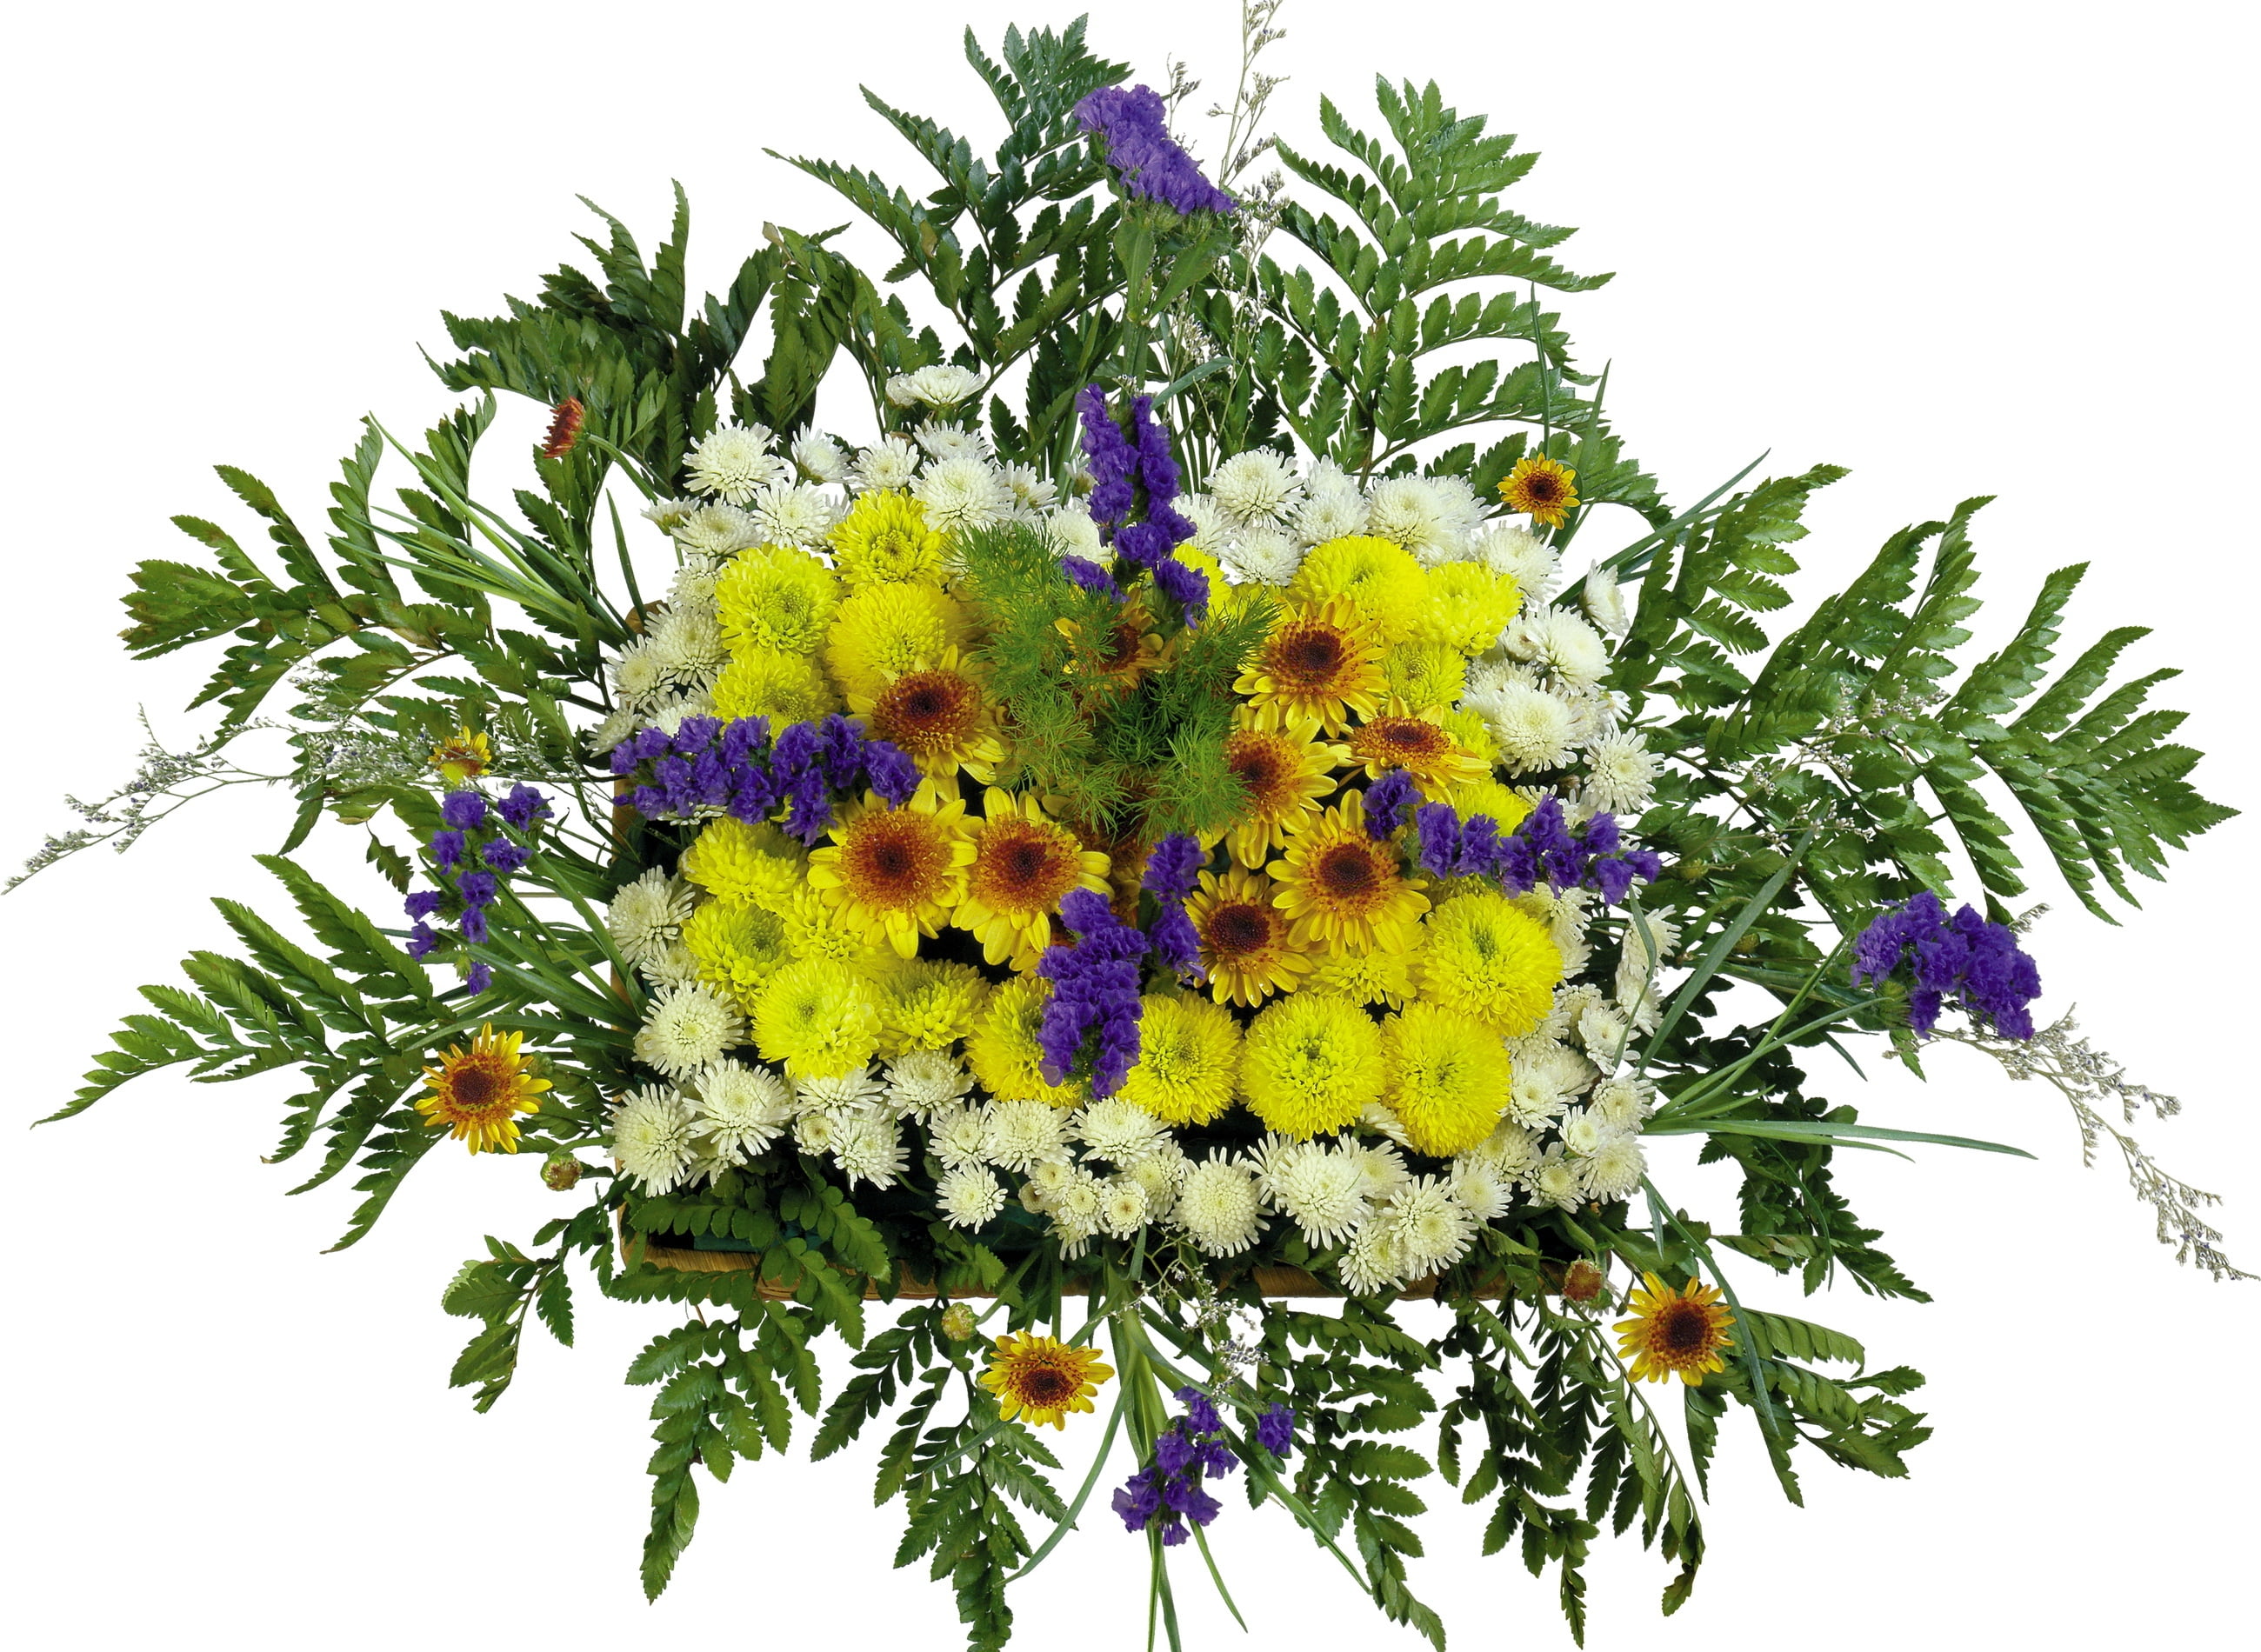 yellow and white Chrysanthemum flowers and green ferns